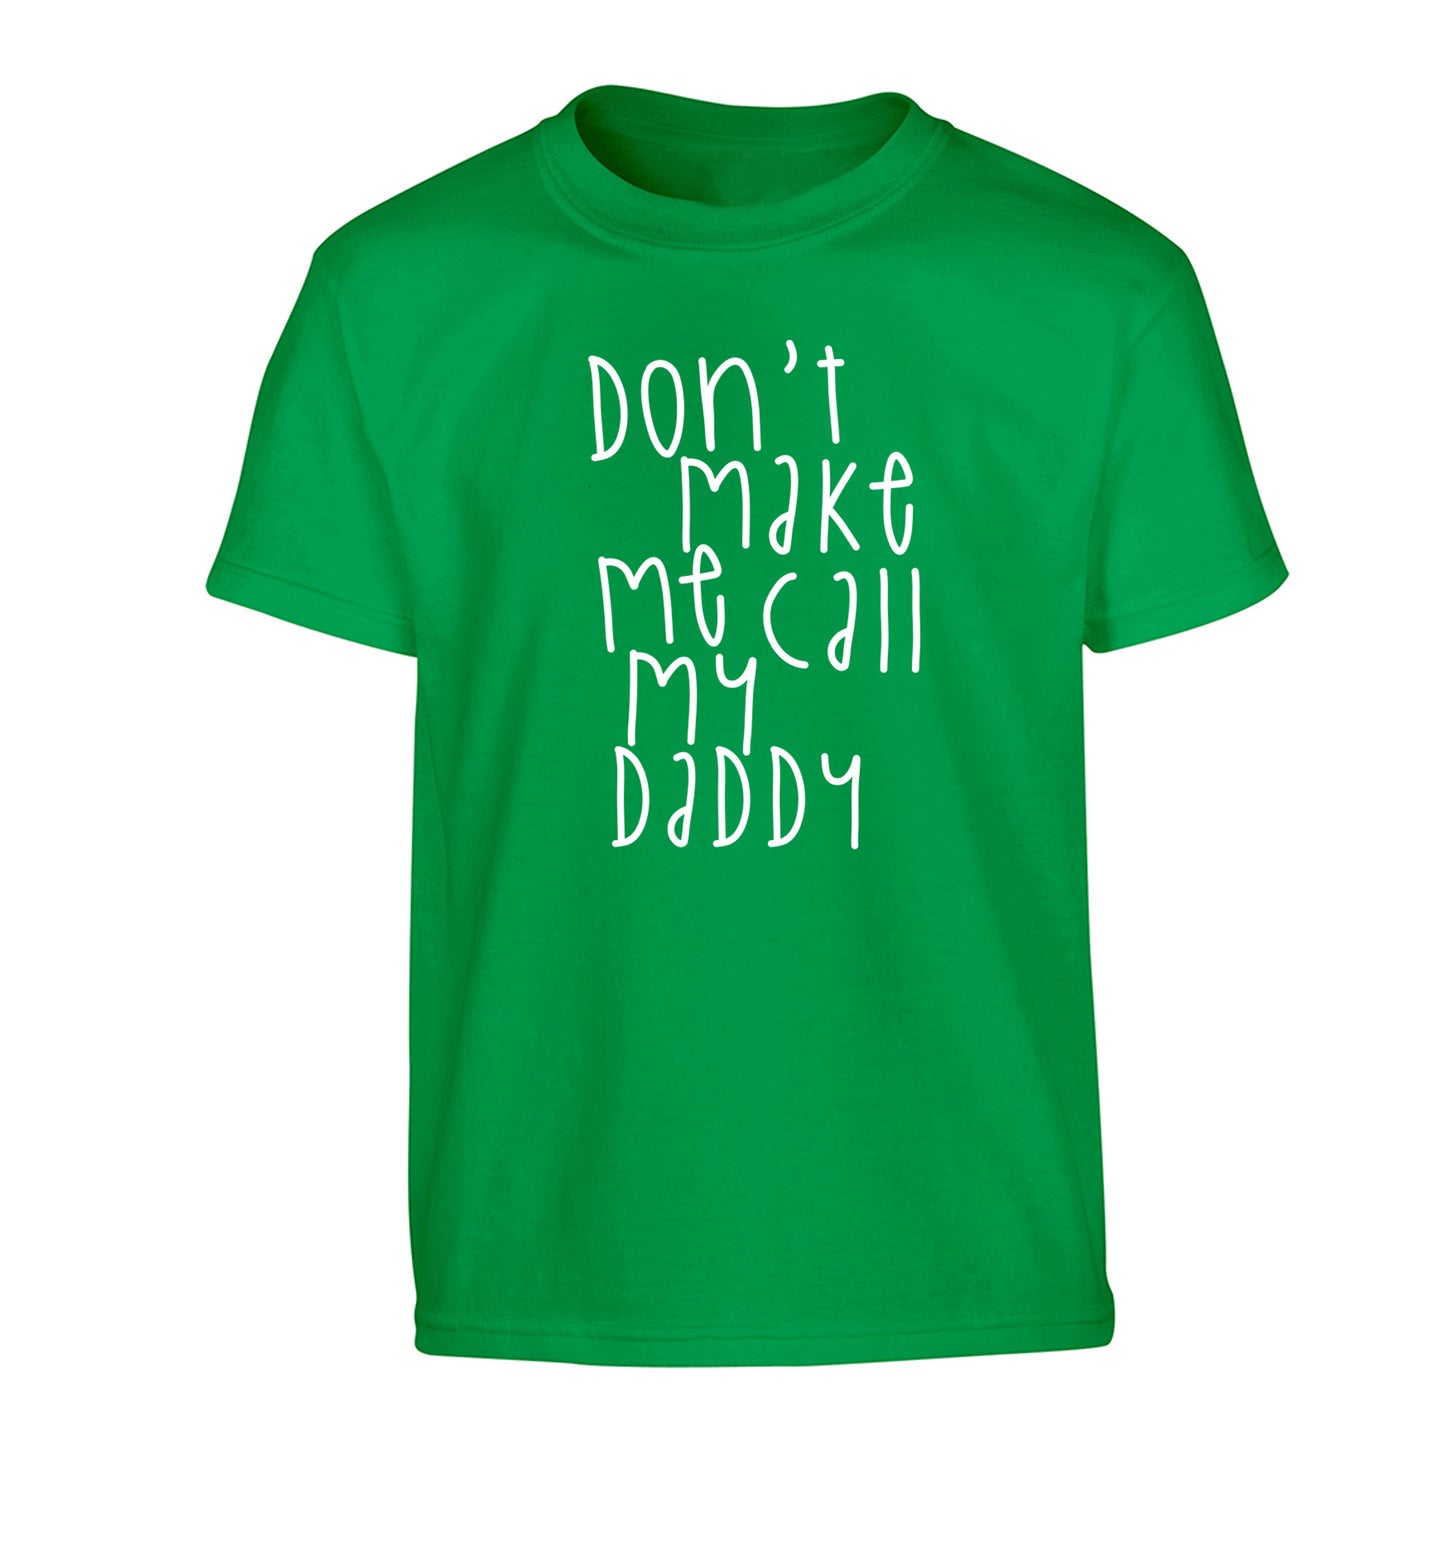 Don't make me call my daddy Children's green Tshirt 12-14 Years